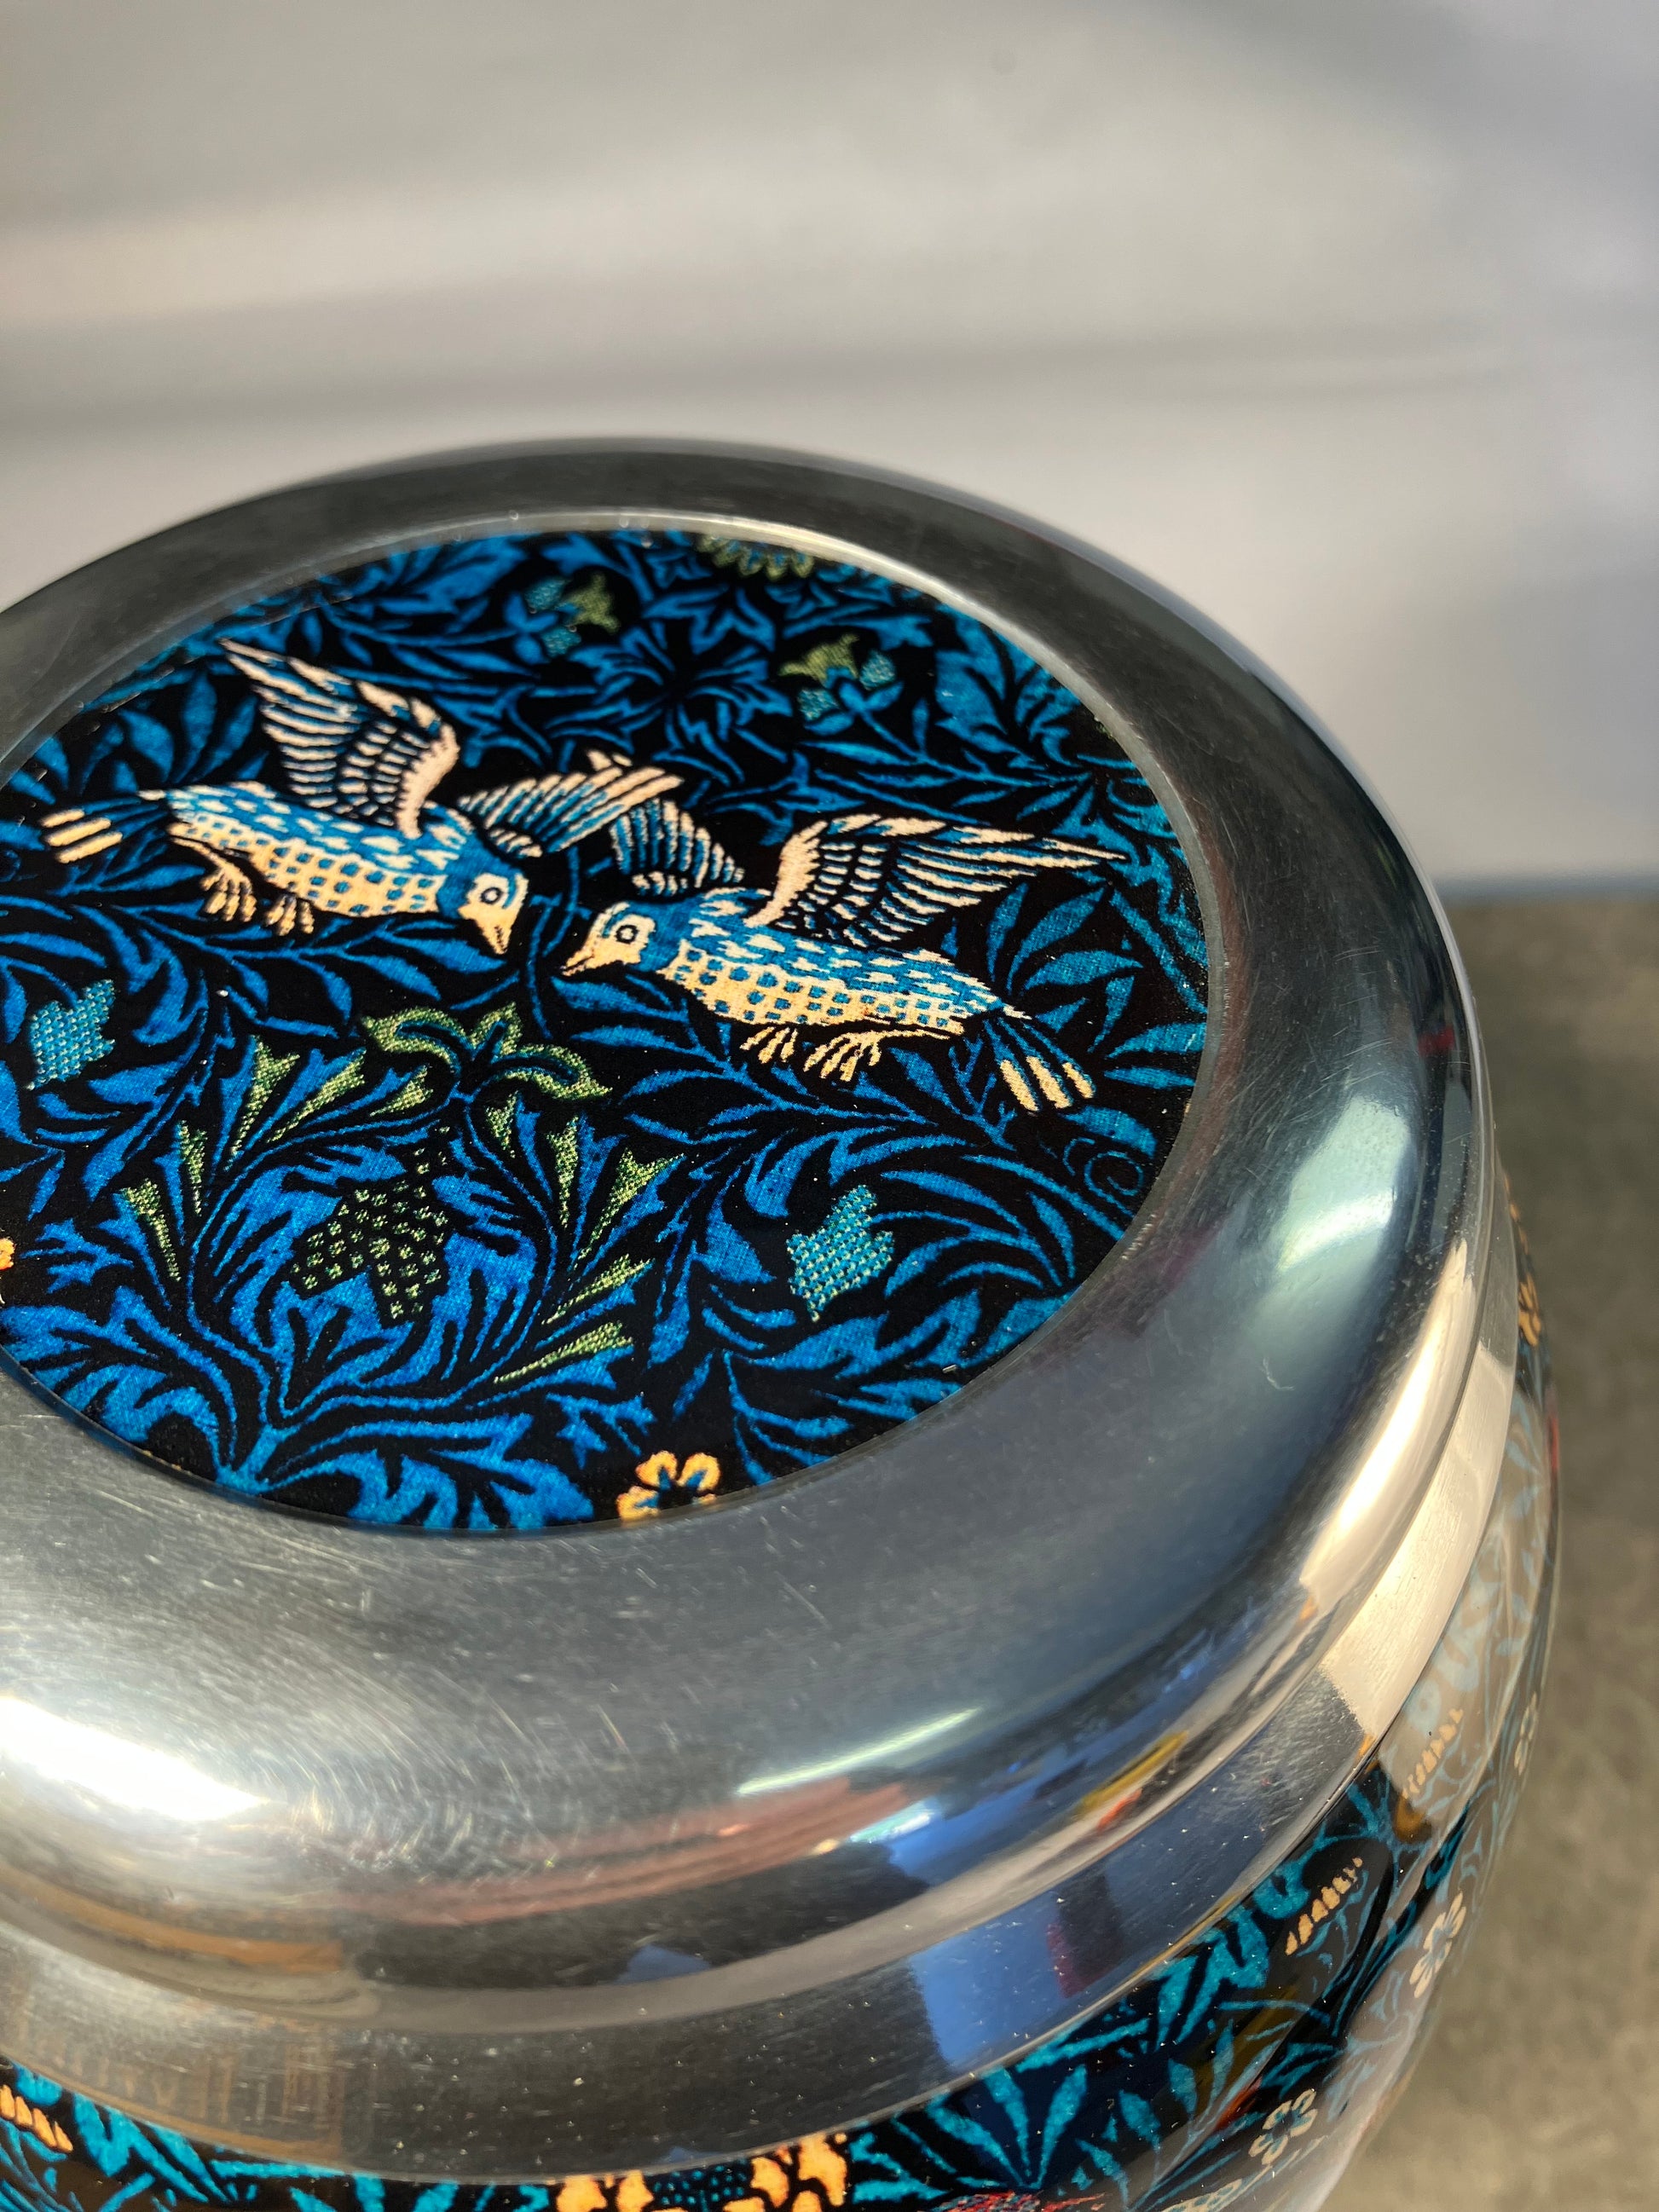 Iontach Adult Ashes Urn-Adult Urn for Ashes-Cremation Urns- The cremation urns for ashes and keepsakes for ashes come in a variety of styles to suit most tastes, decor and different volumes of funeral ashes.